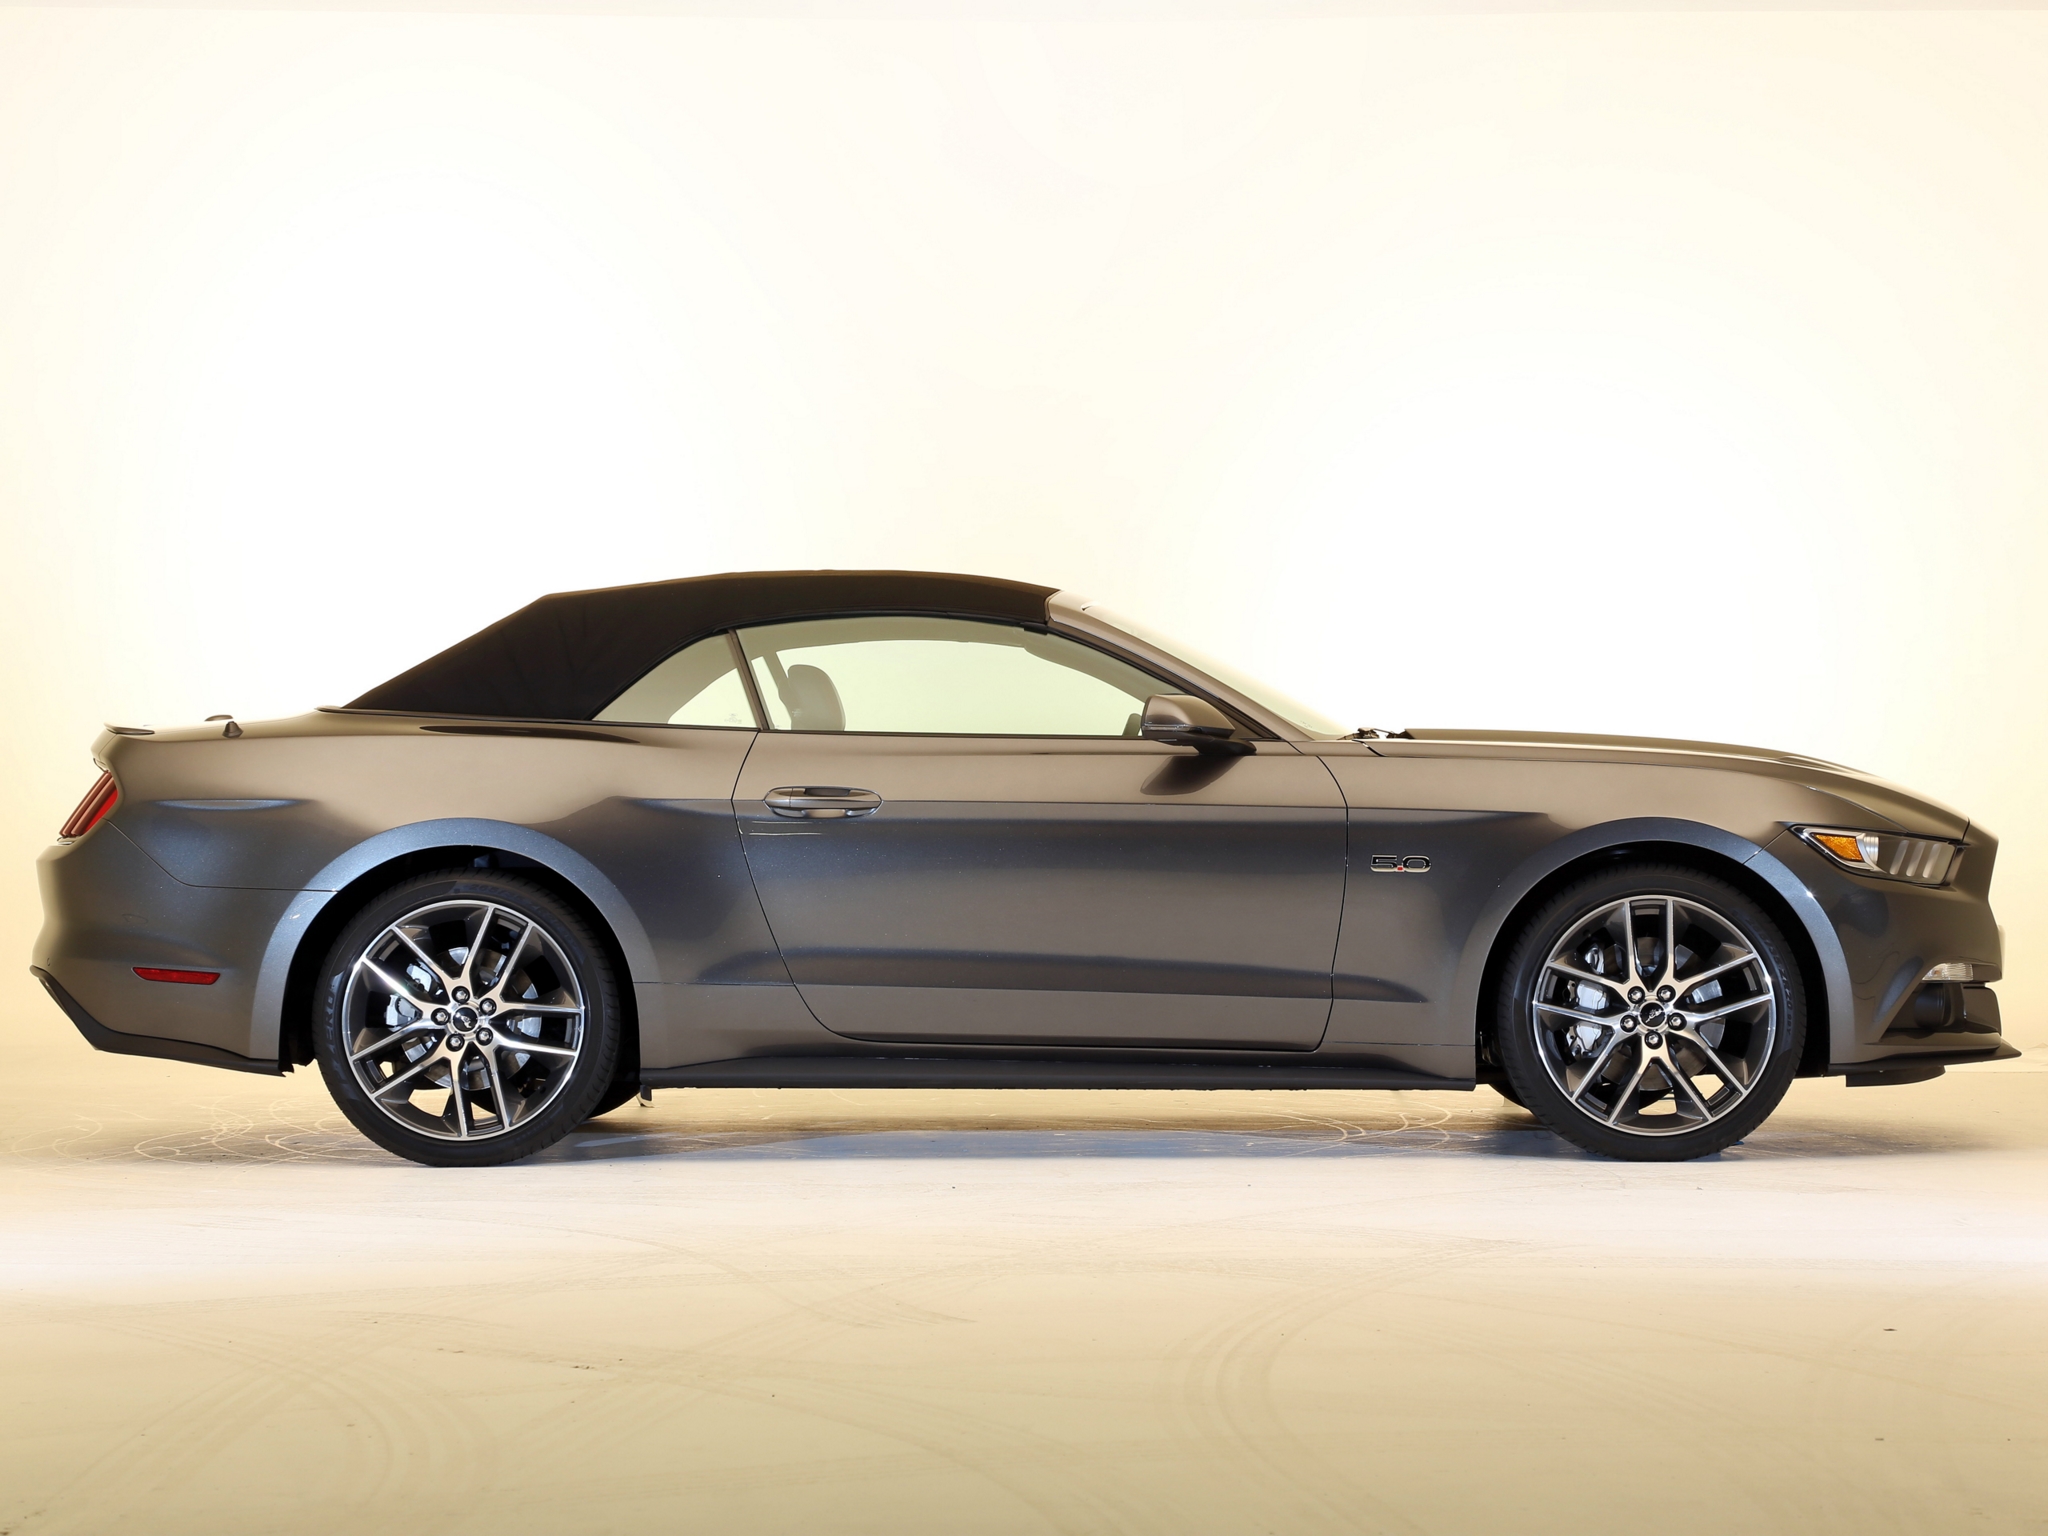 2014, Ford, Mustang, G t, Convertible, Muscle Wallpaper